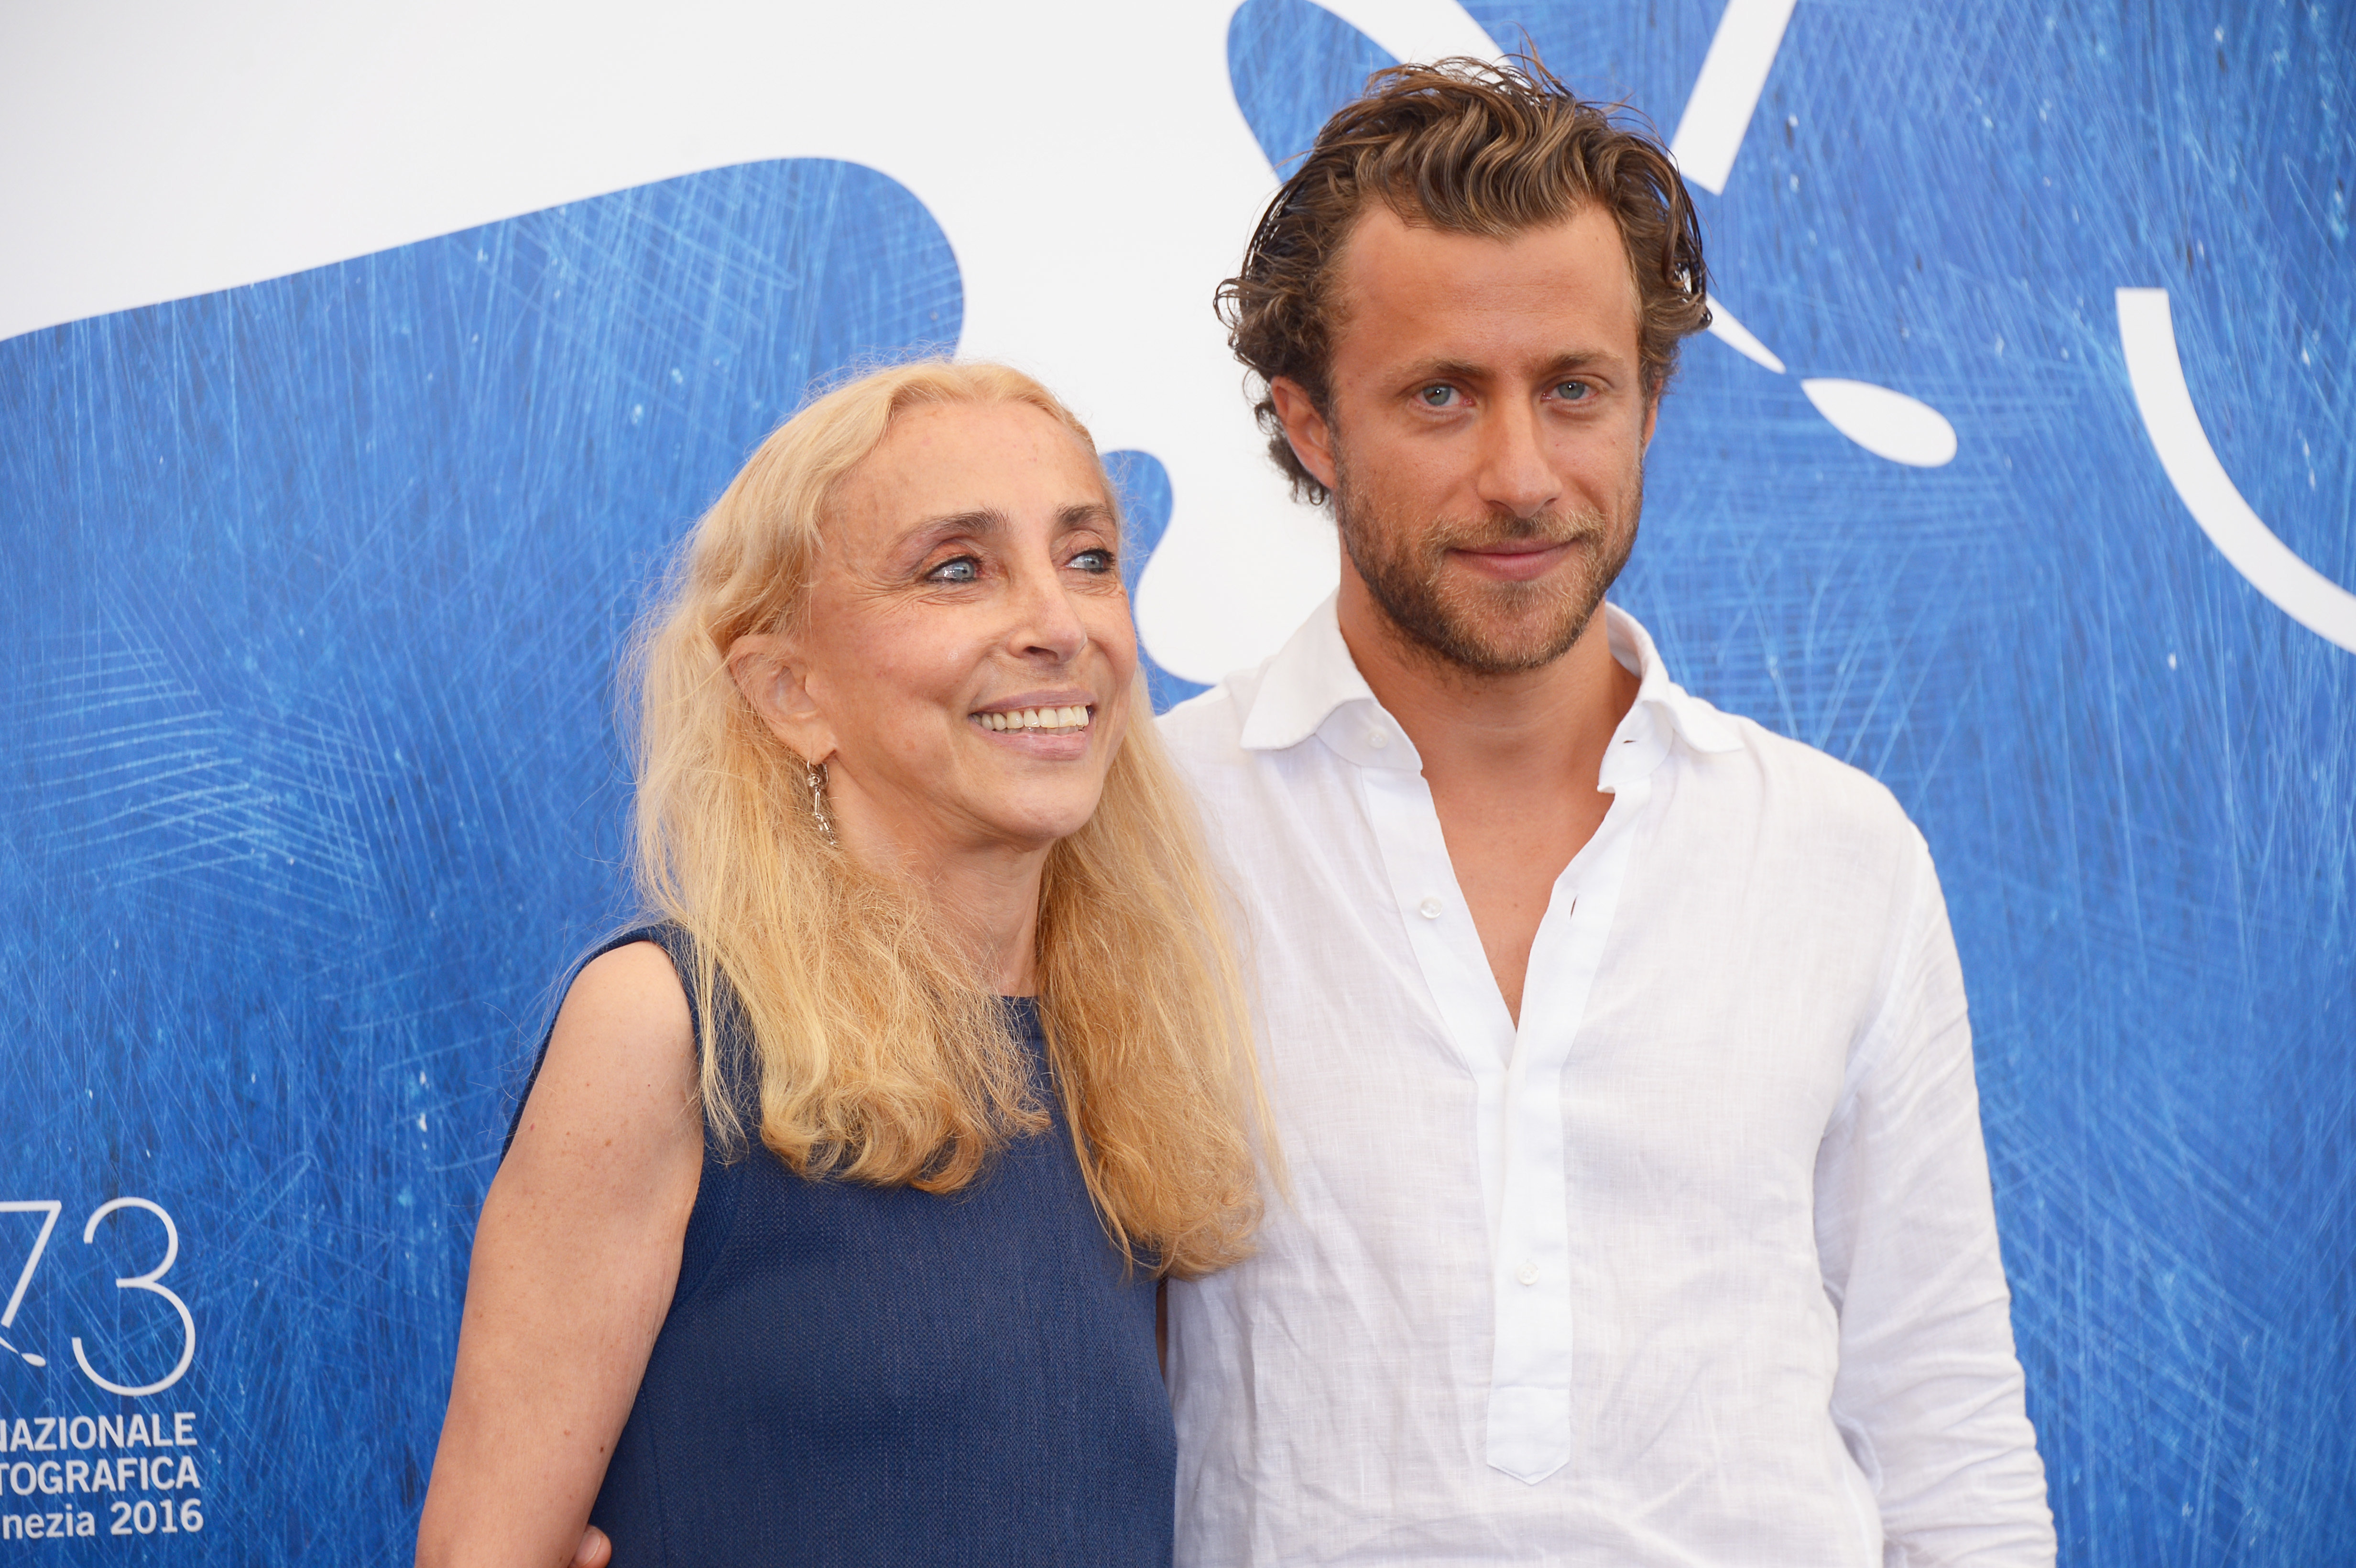 Franca Sozzani and Francesco Carrozzini attend the photocall of 'Francs: Chaos And Creation' on 2 September 2016.